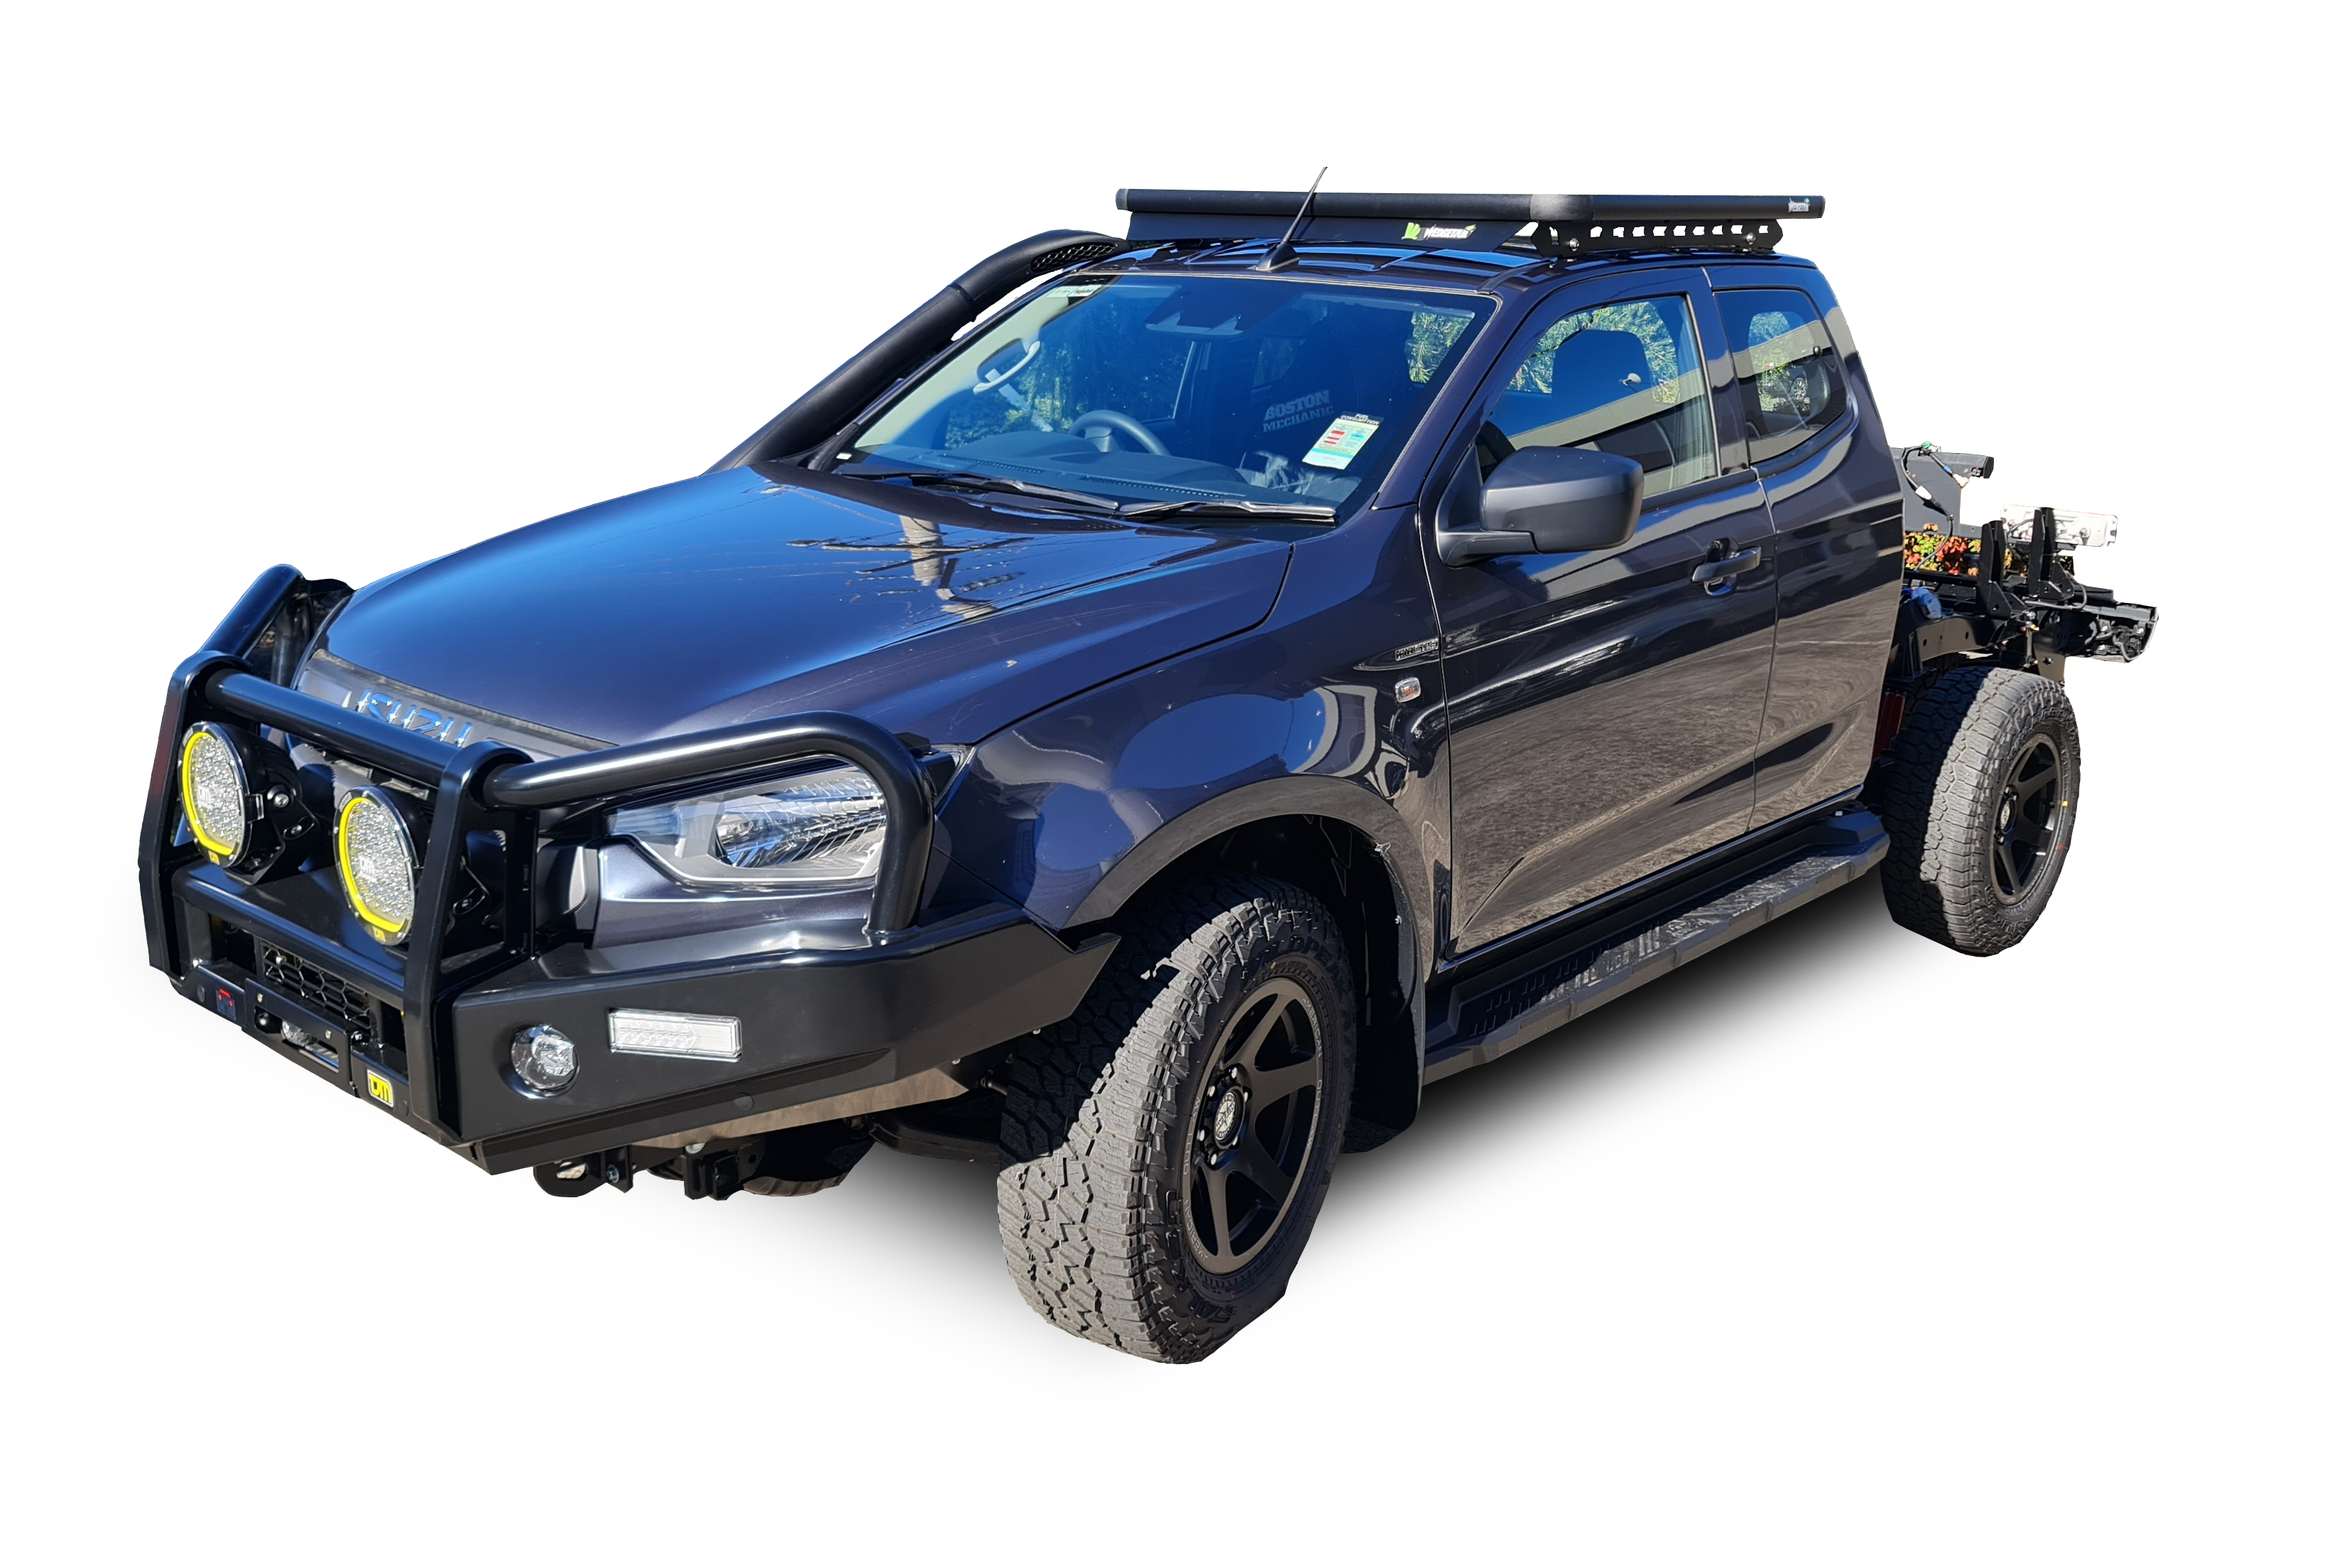 2020 Isuzu D-Max dual cab ute with a Wedgetail rack installed – hero image.